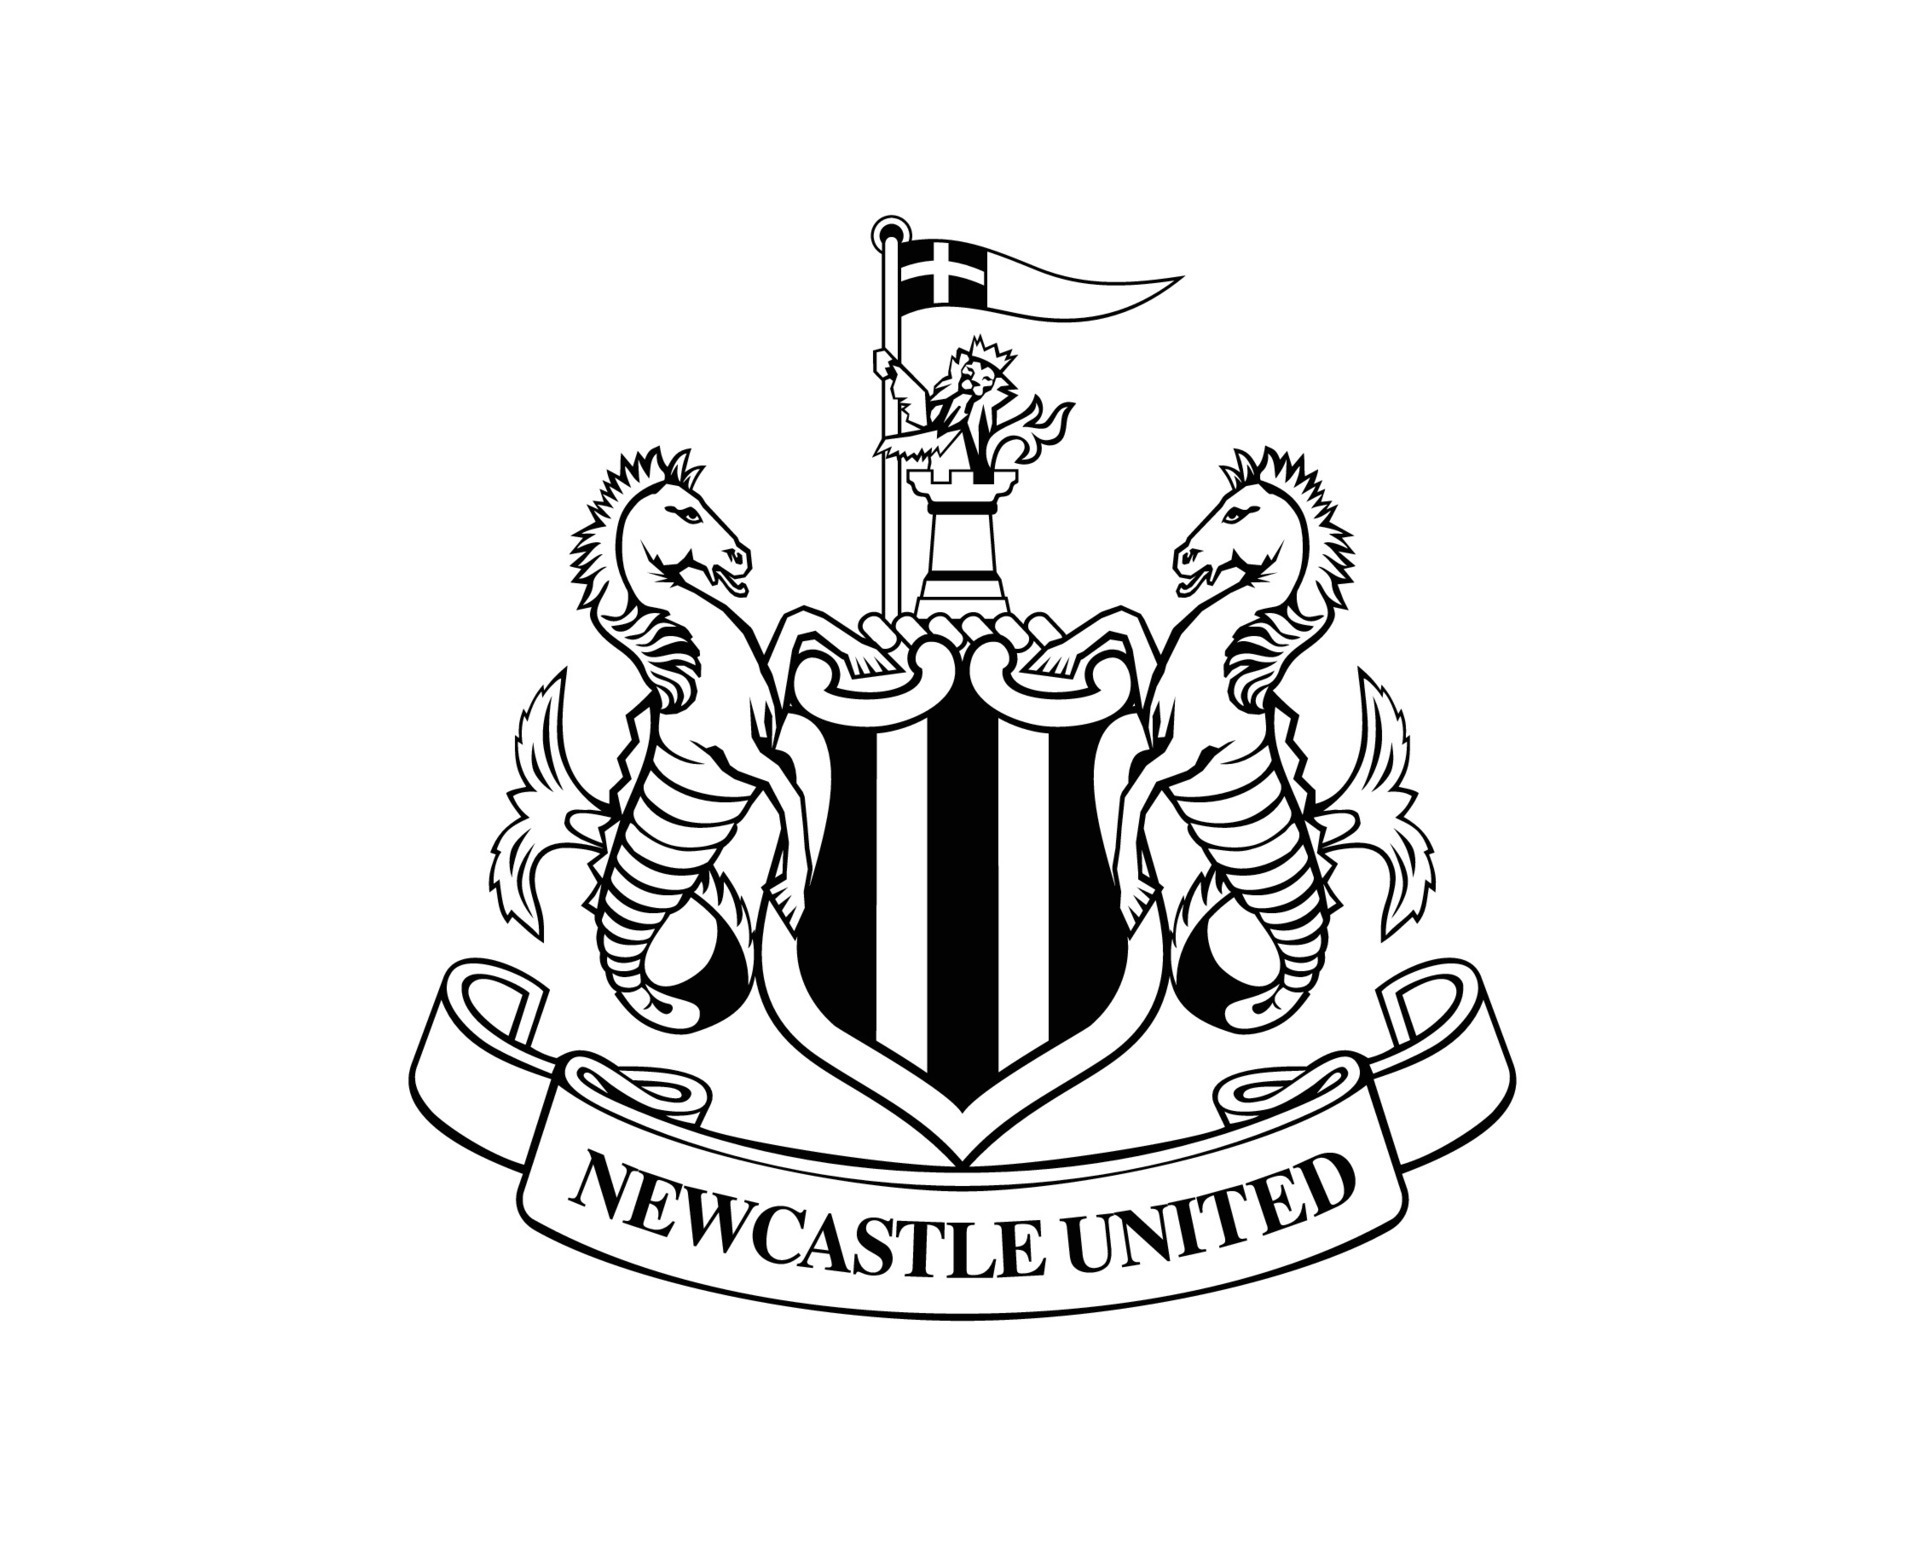 On new year’s eve, Newcastle United officially announces Danny Murphy.